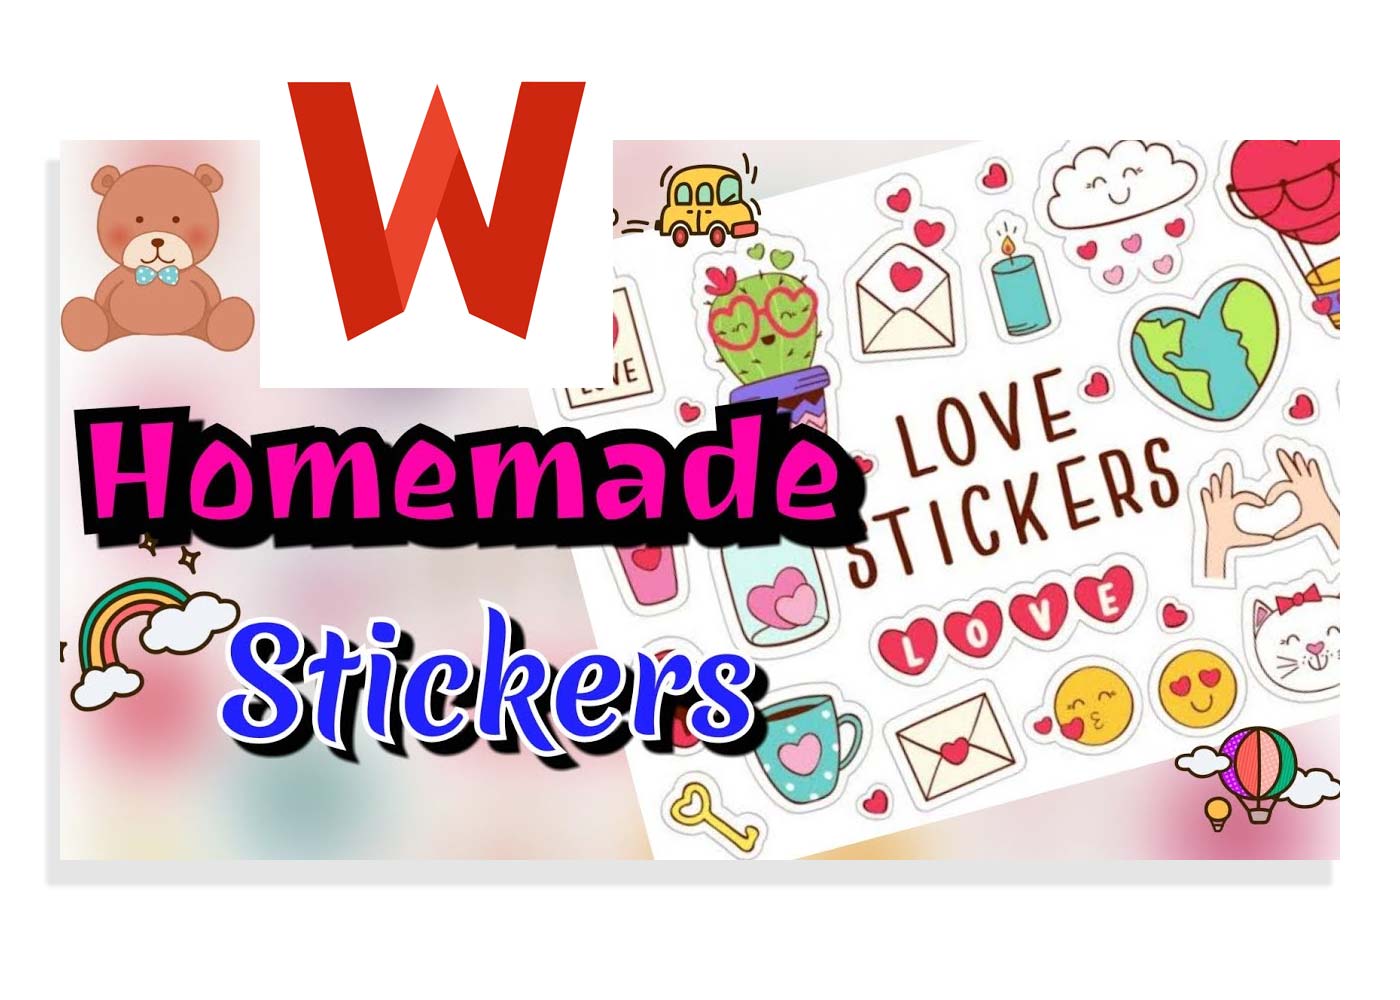 How to Make Homemade Stickers